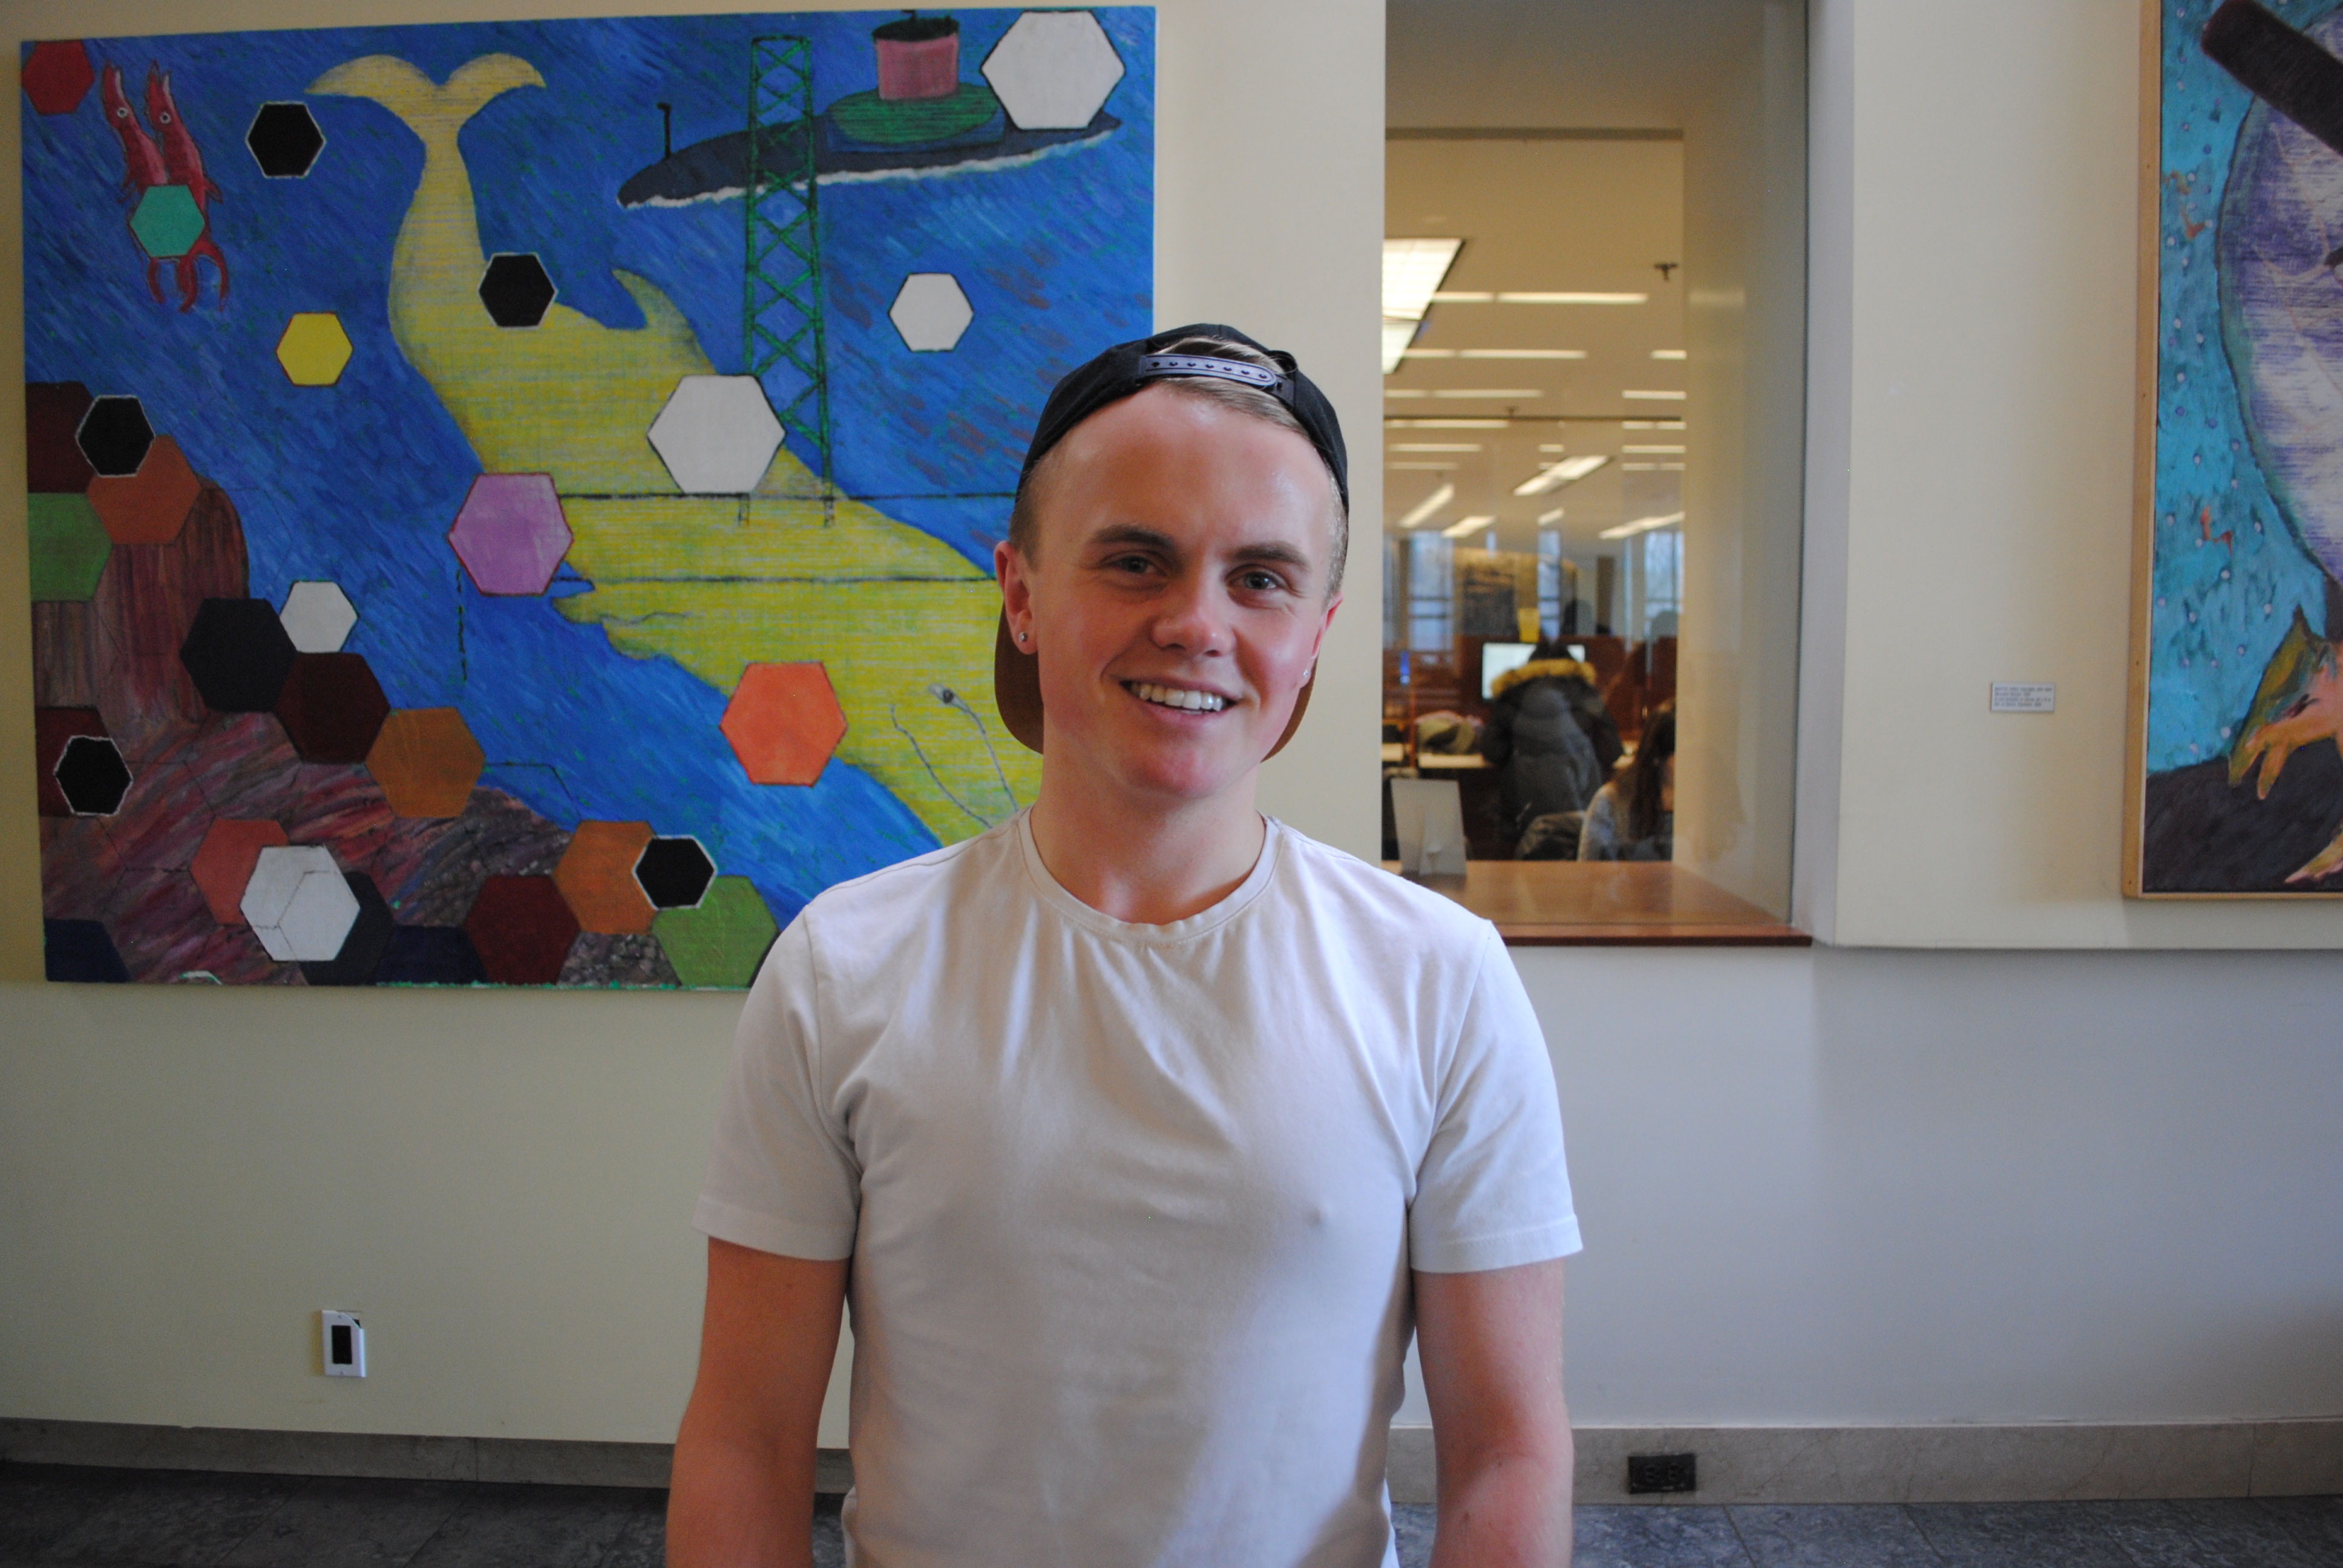 Robbie in front of the colourful murals in the Gerstein lobby.